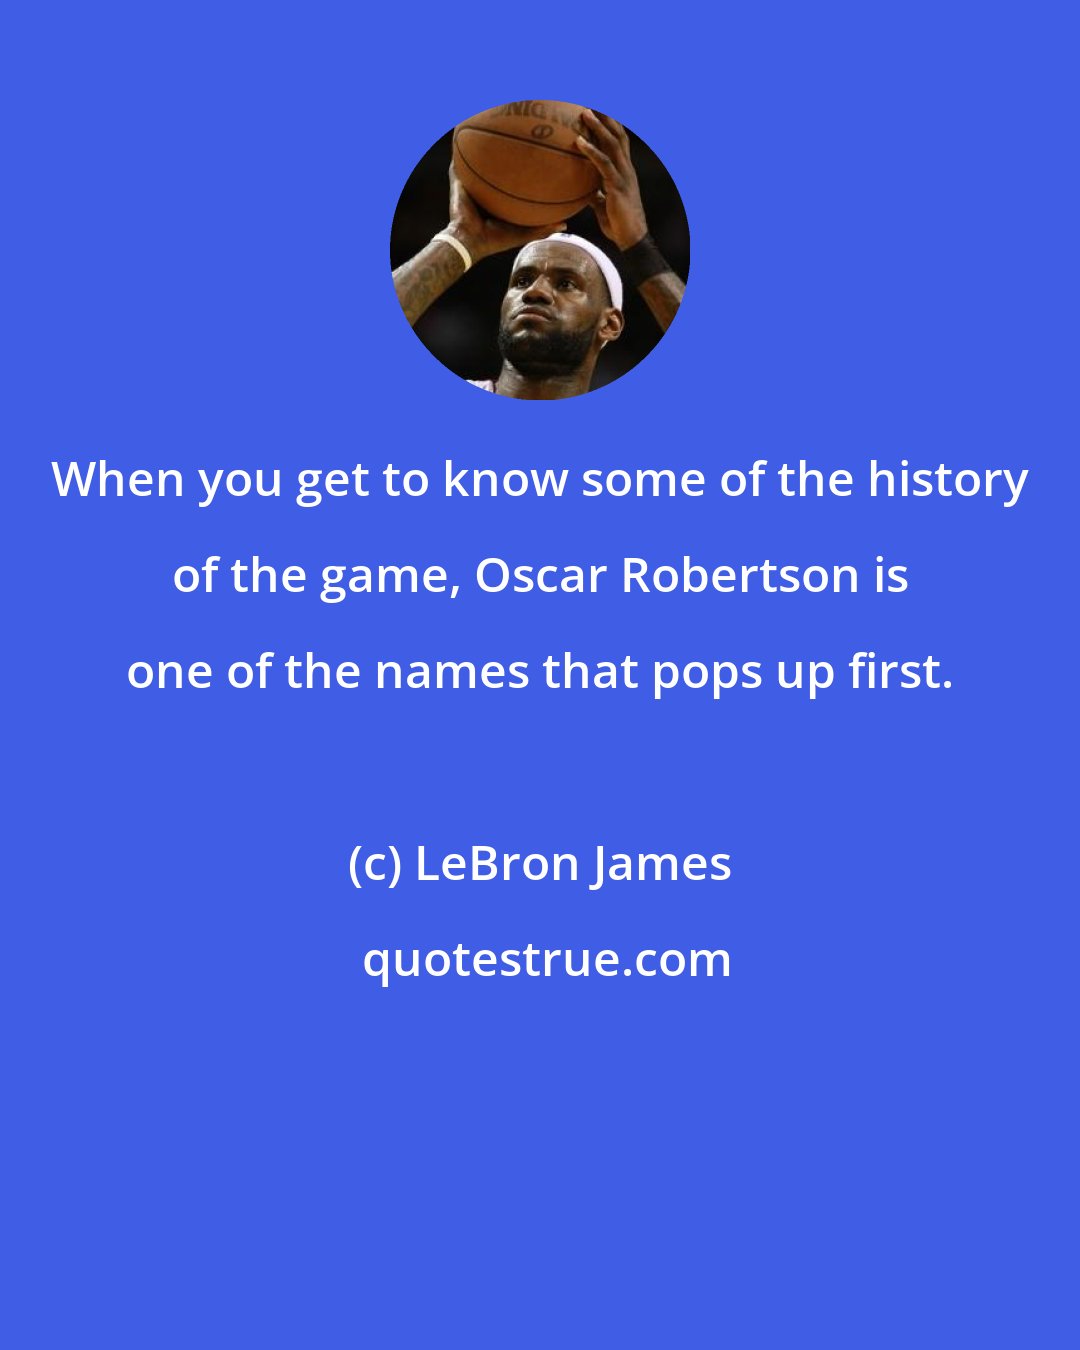 LeBron James: When you get to know some of the history of the game, Oscar Robertson is one of the names that pops up first.